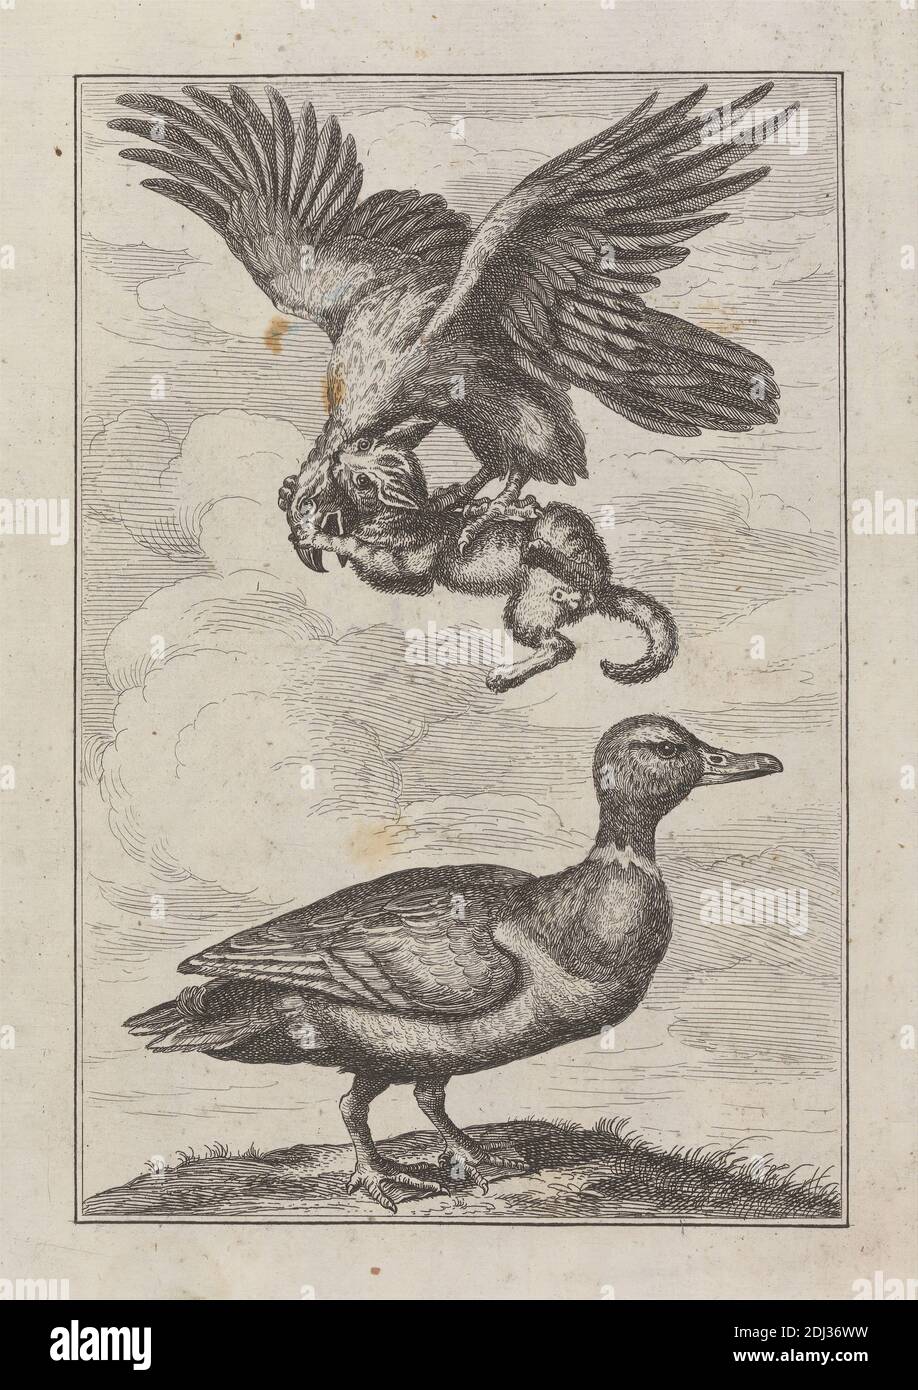 A Duck and an Eagle with prey, a Pl. for 'A New Drawing Book...of Various Kinds of Birds, Drawn From the Life by Mr. Francis Barlow, 1731 (1 of 9), Print made by George Bickham, 1683/4–1758, British, after Francis Barlow, ca. 1626–1704, British, Published by Henry Overton, 1675/6–1751, British, 1731, Etching on medium, smooth, cream laid paper, Sheet: 11 3/8 x 7 5/16 inches (28.9 x 18.5 cm), Plate: 7 1/4 x 6 inches (18.4 x 15.3 cm), and Image: 7 3/16 x 4 13/16 inches (18.2 x 12.3 cm), animal art, birds, cat, clouds, duck, eagles (birds), flying, grass, kitten, prey Stock Photo